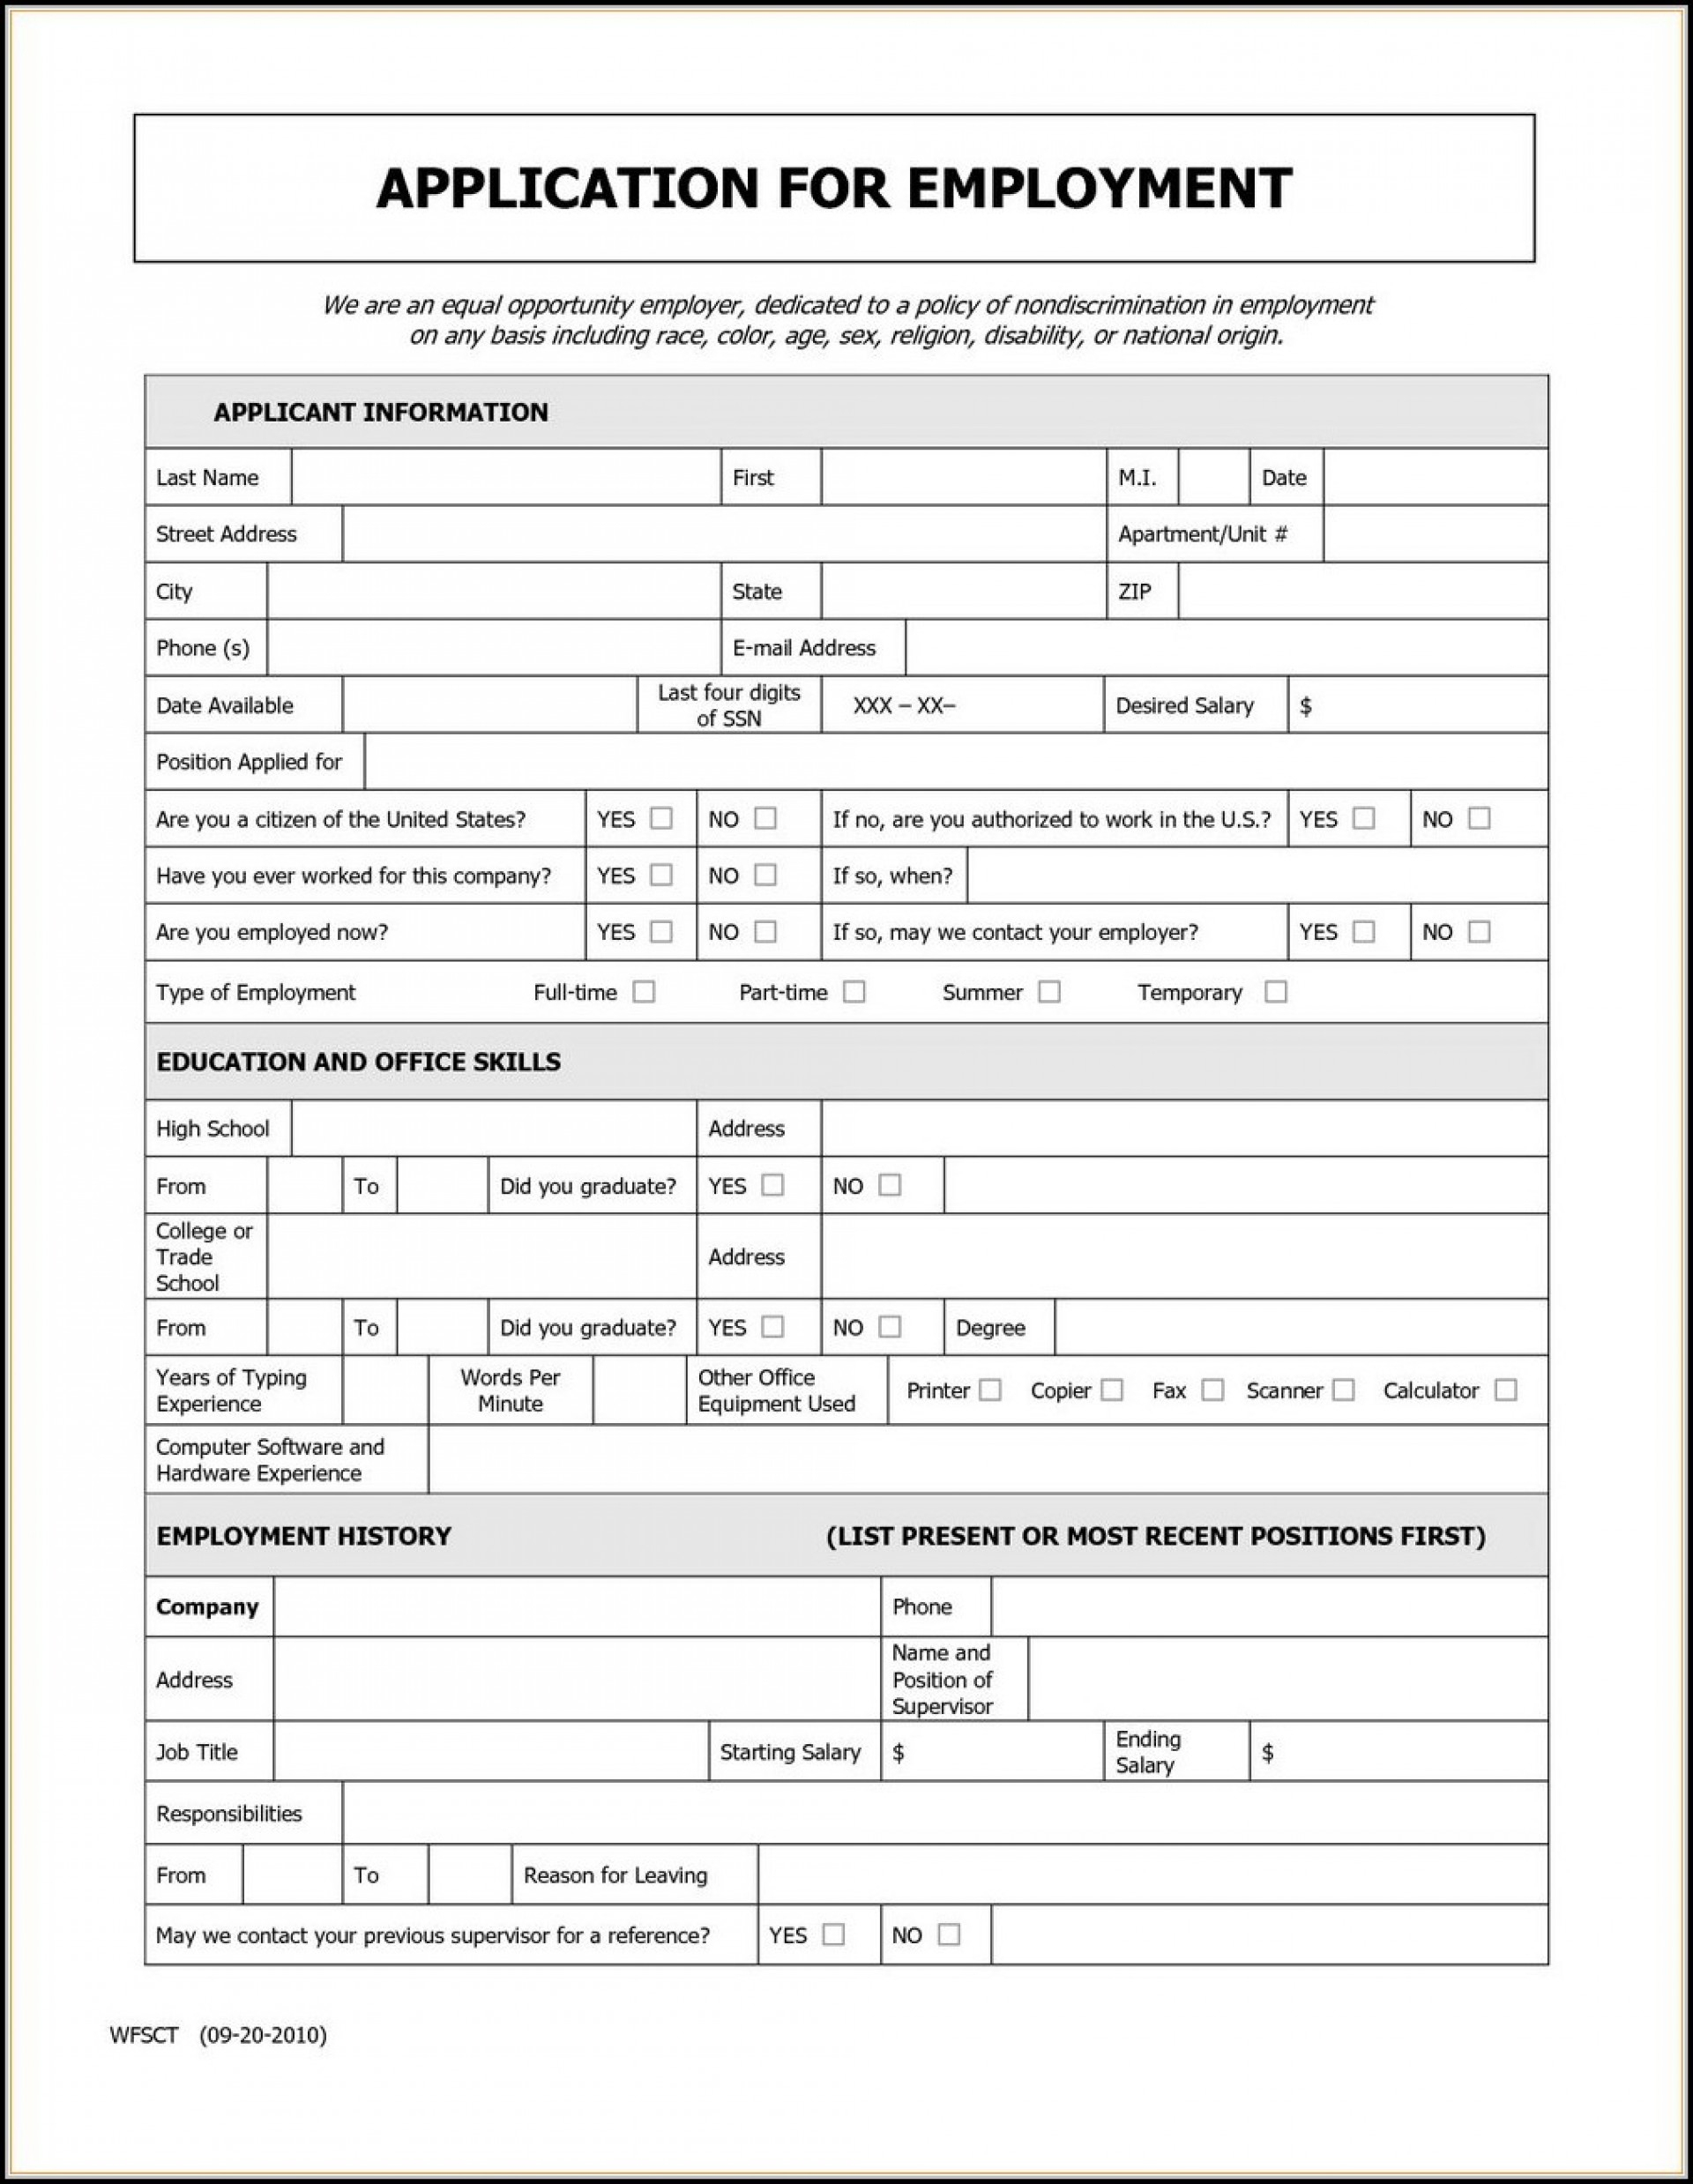 023 General Application For Employment Templatewriting Is Easy - Free Printable General Application For Employment